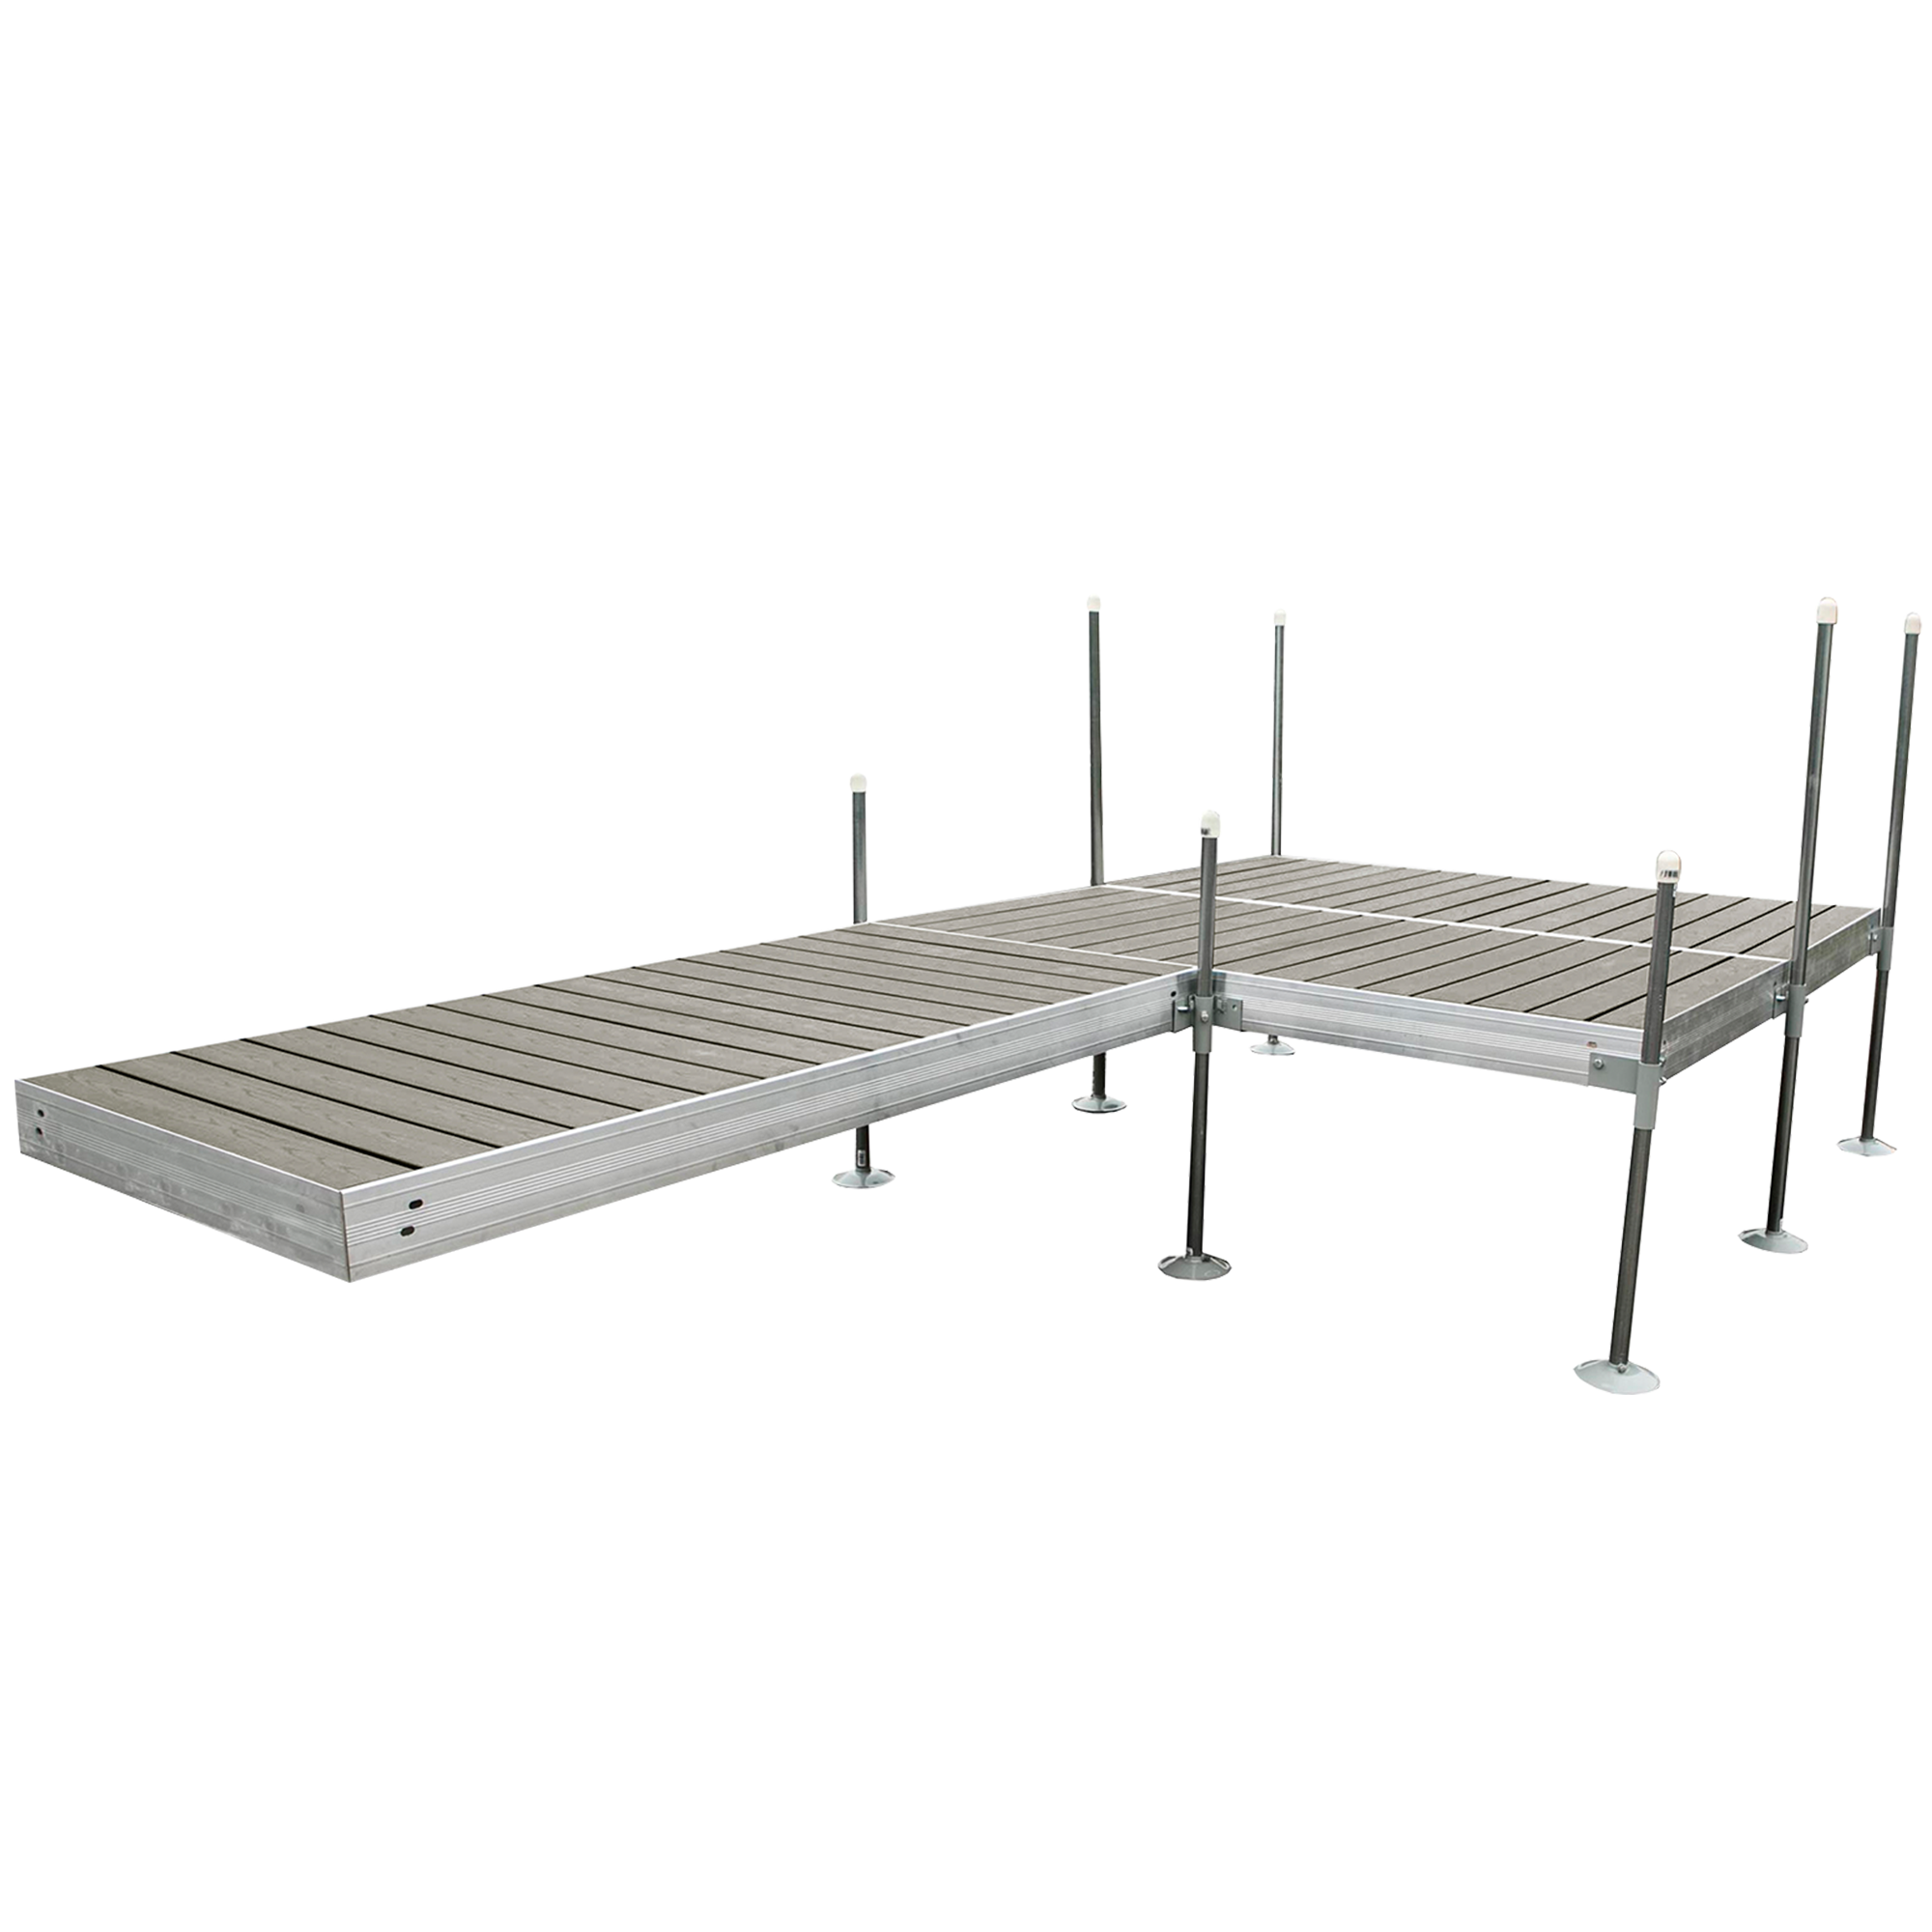 16' Platform Boat Dock System with Aluminum Frame and Gray Composite Decking